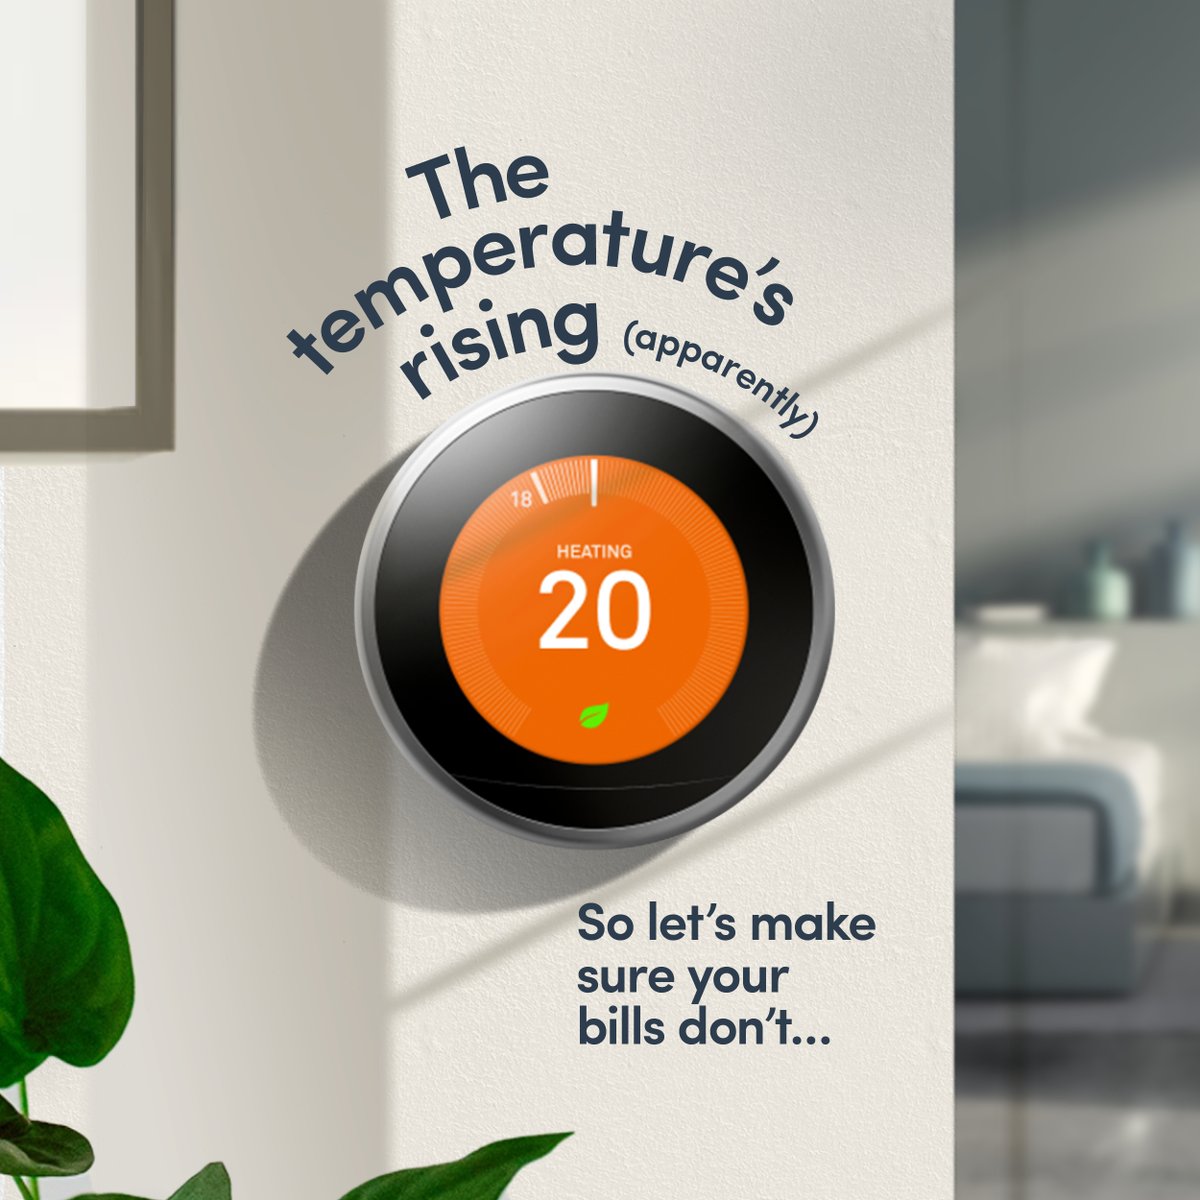 Rain rain, go away. ☔ It might still be raining, but temperatures are rising. Keep an eye on your thermostat schedule to ensure you’re not heating your home for too long and running up your energy bills. For more ways to save, head to our website 👉 bit.ly/3xtdXjs